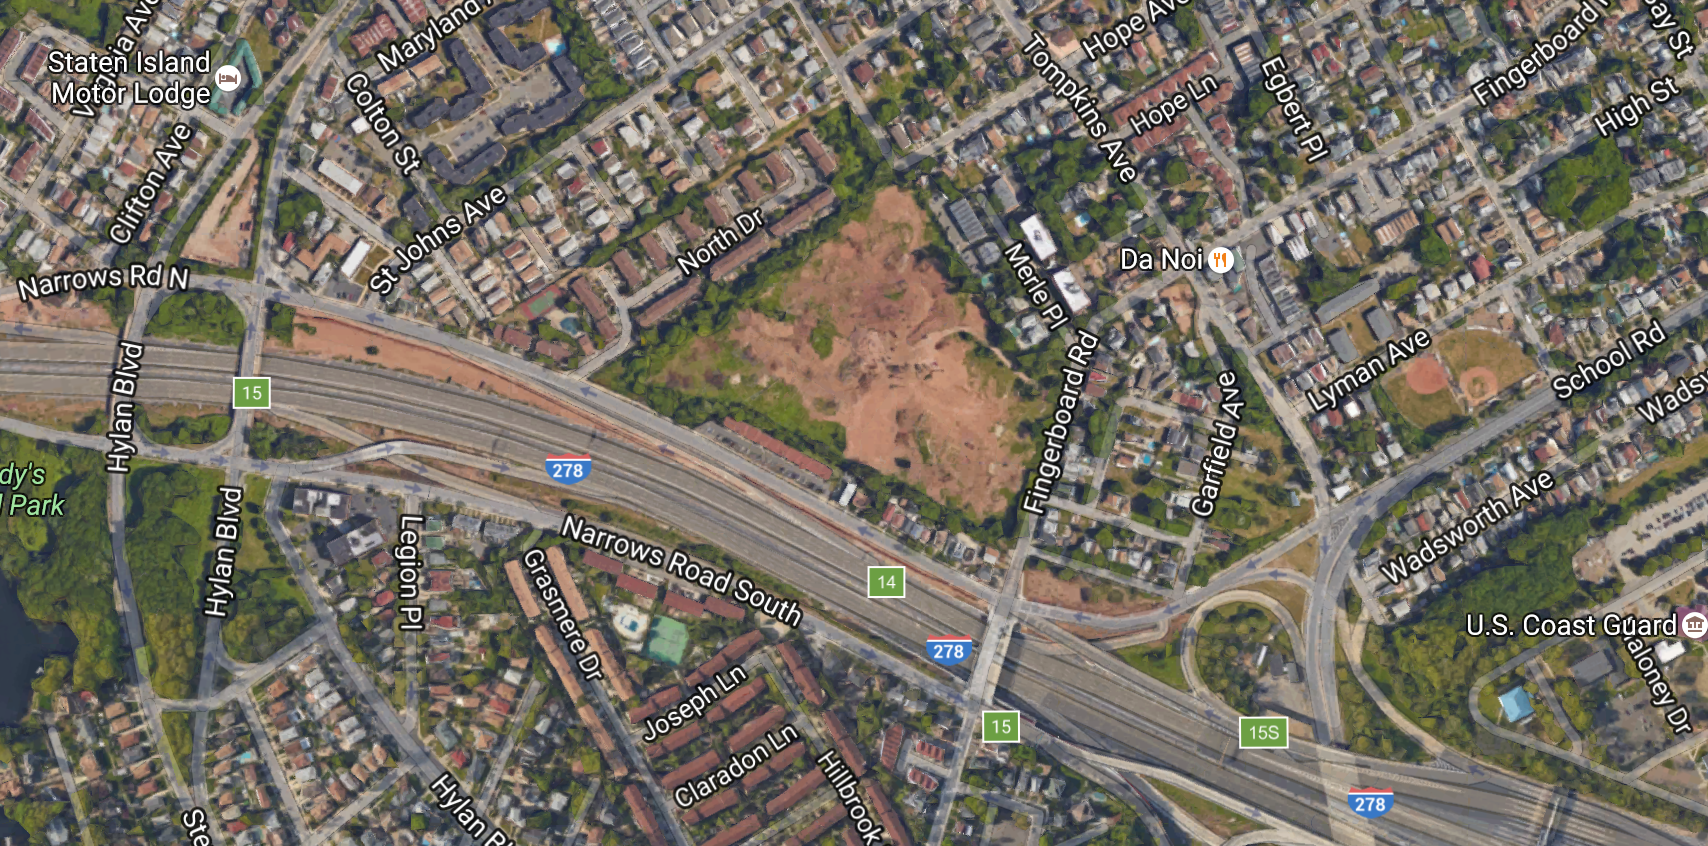 An aerial view of cleared Mount Manresa site, image via Google Maps